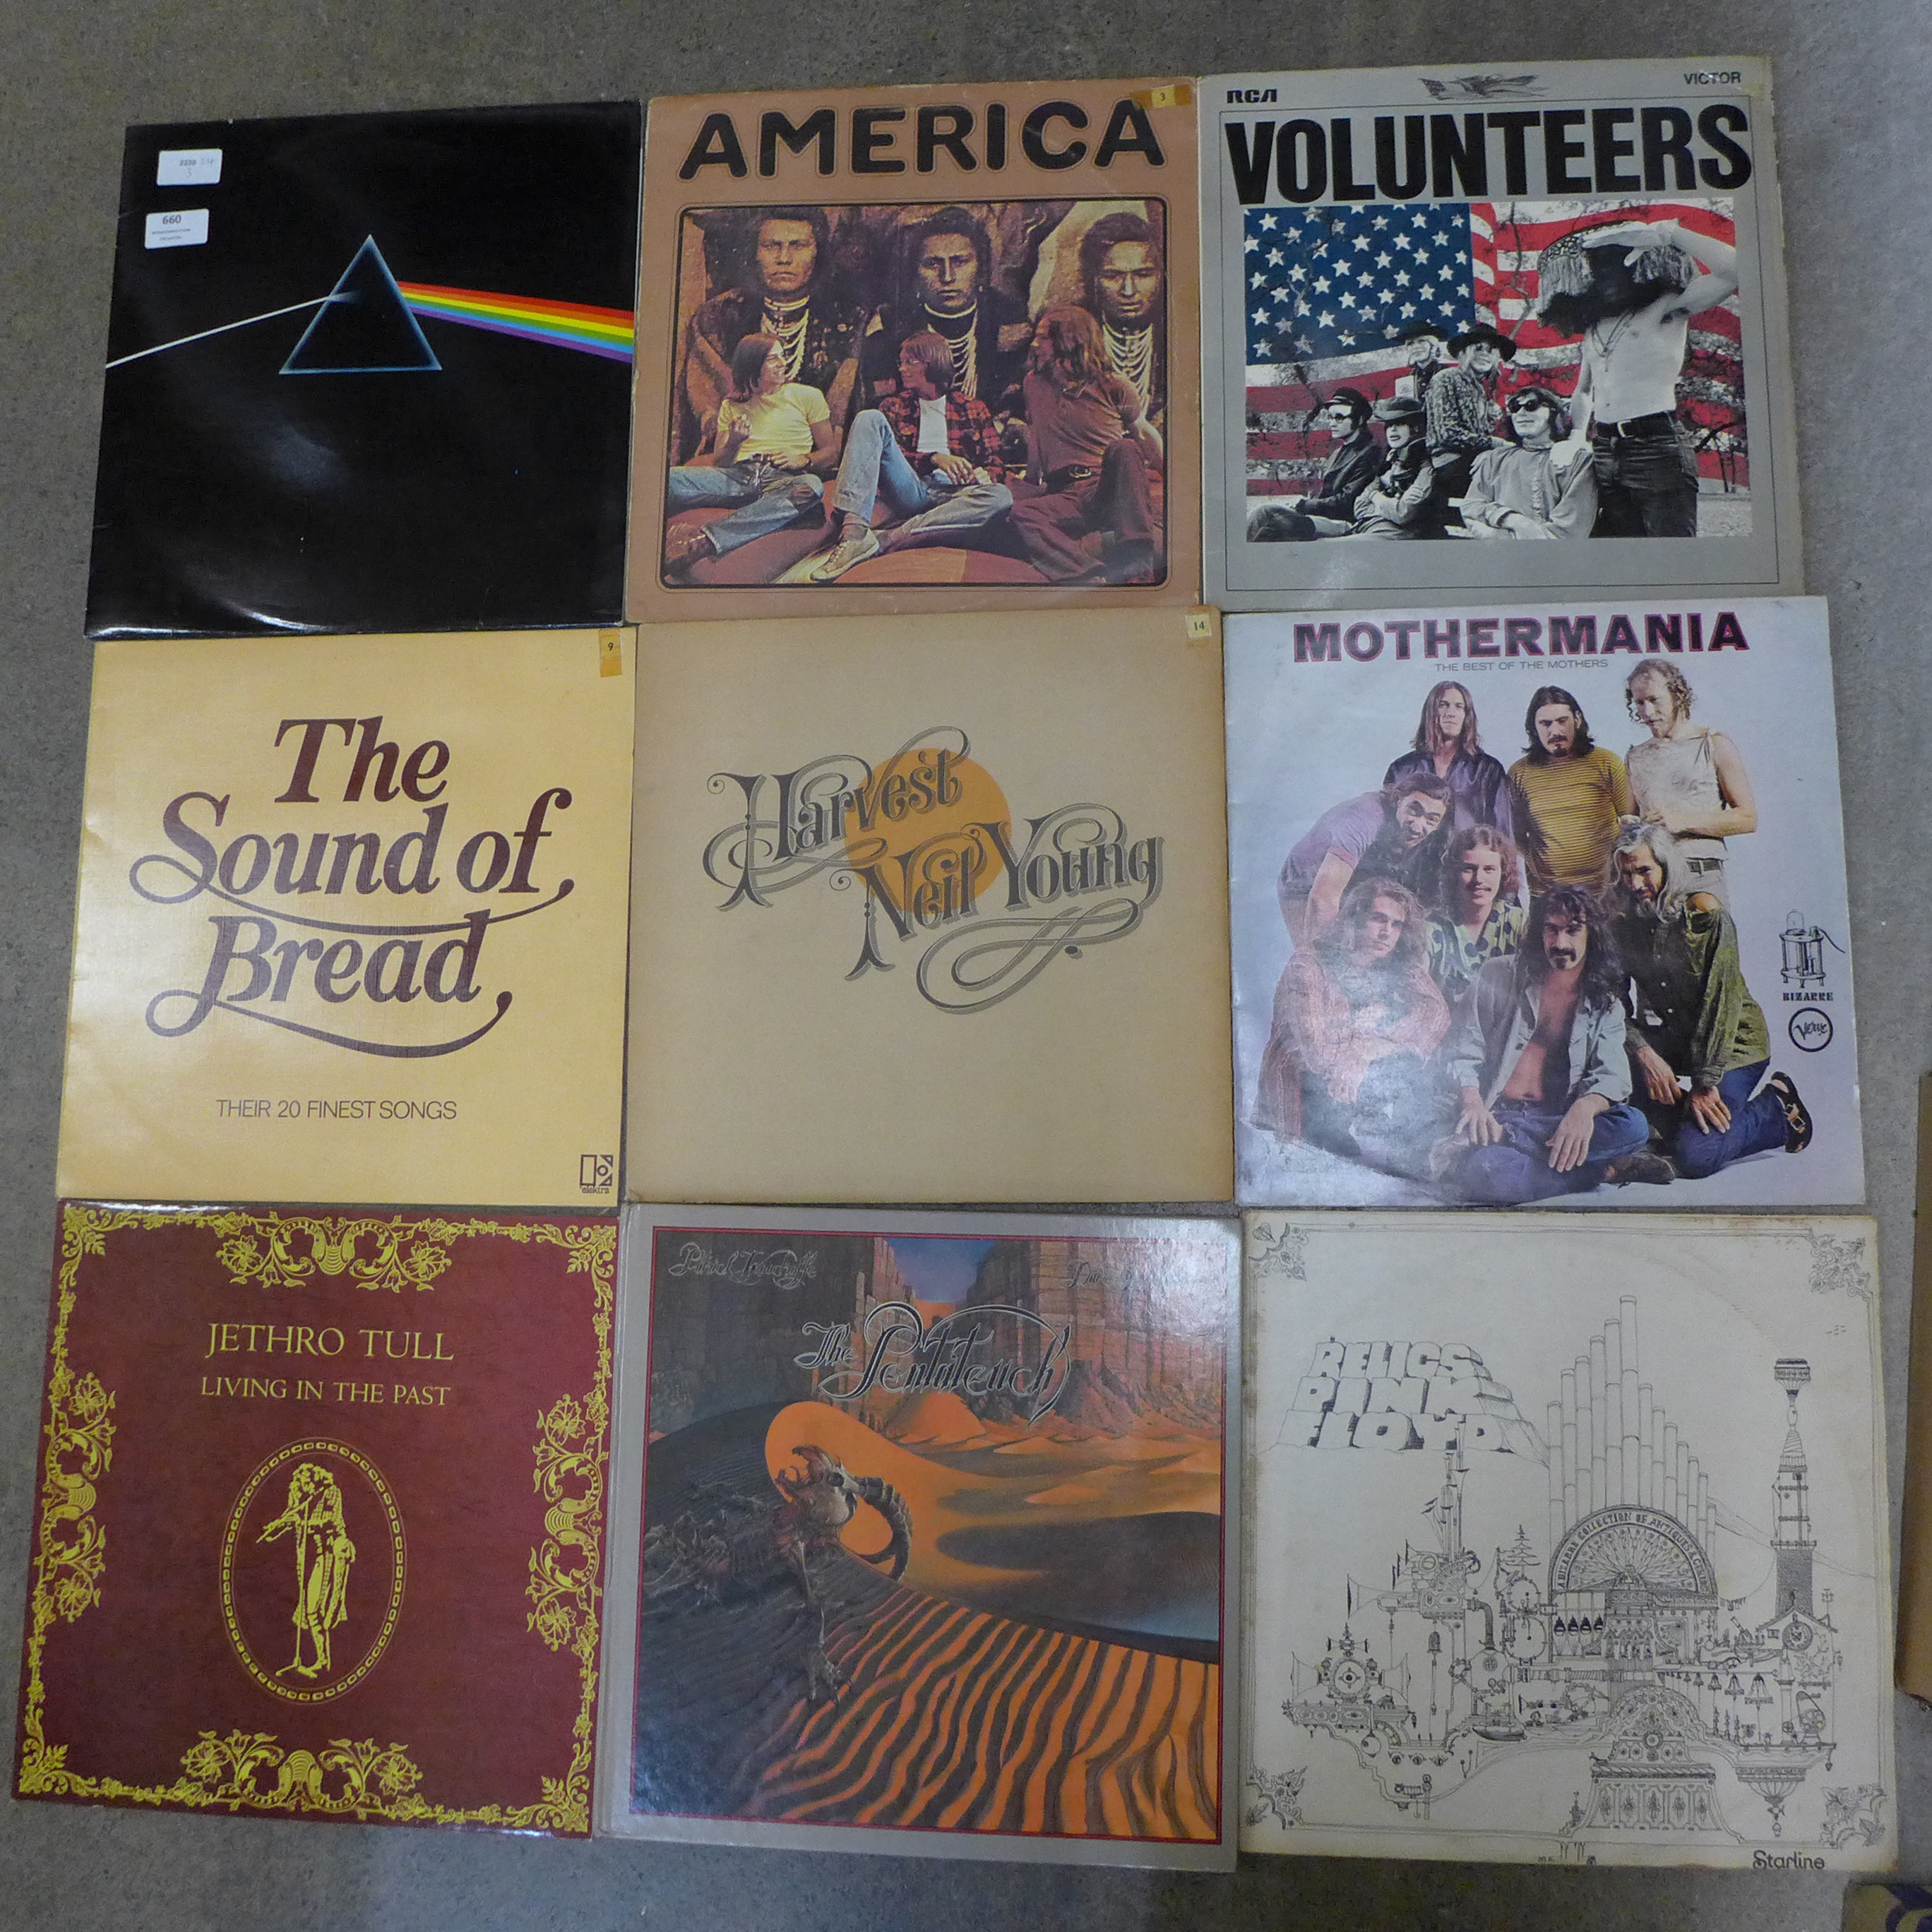 Rock LP records including America, Pink Floyd Dark Side of The Moon (with inserts), Jethro Tull,